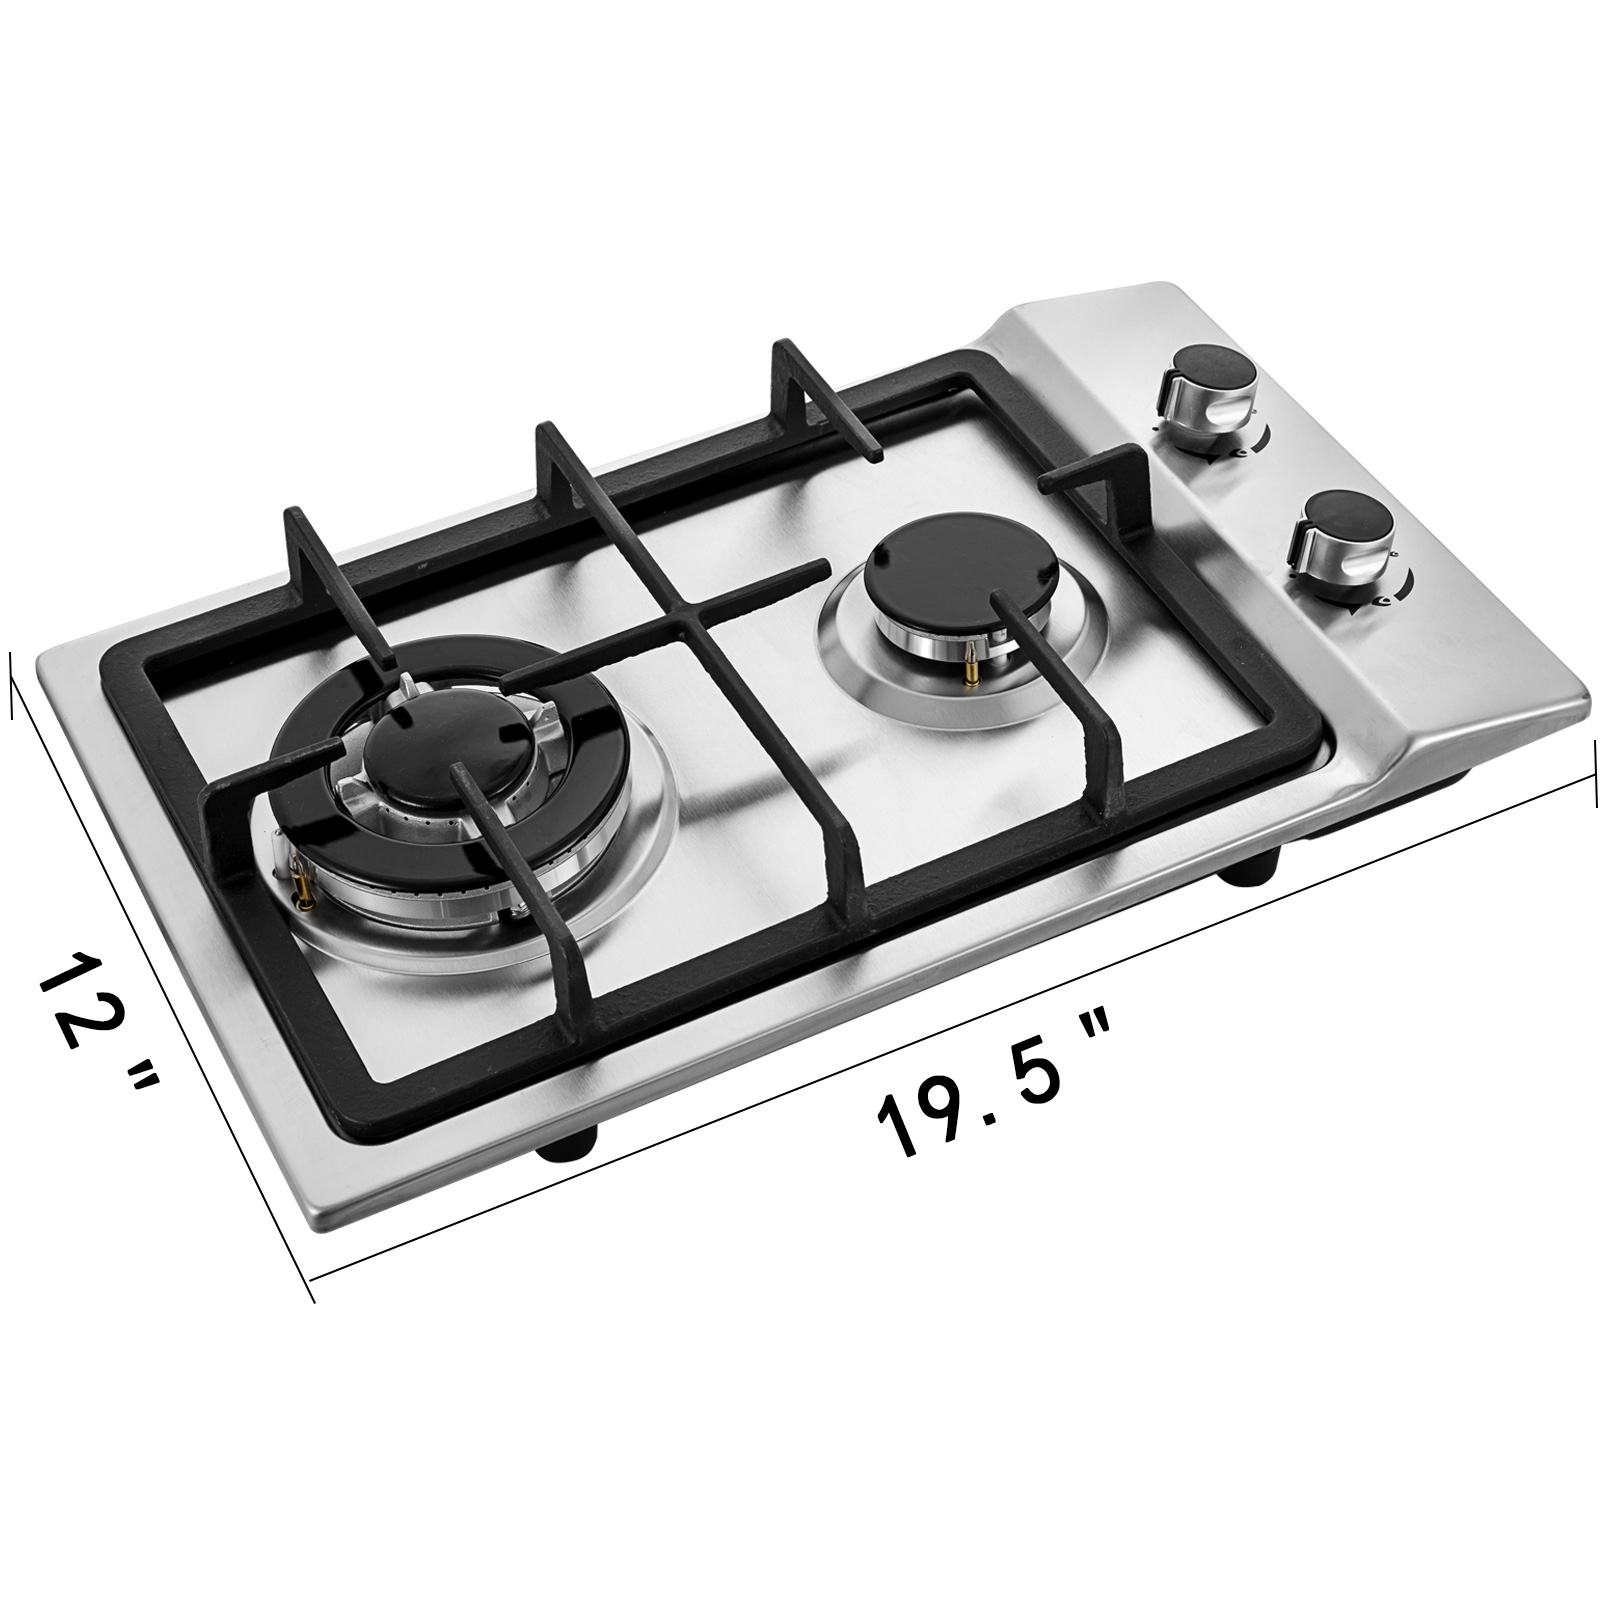 12" 2 Burners Gas Cooktop Stainless Steel Double Burner 3.3kW Durable